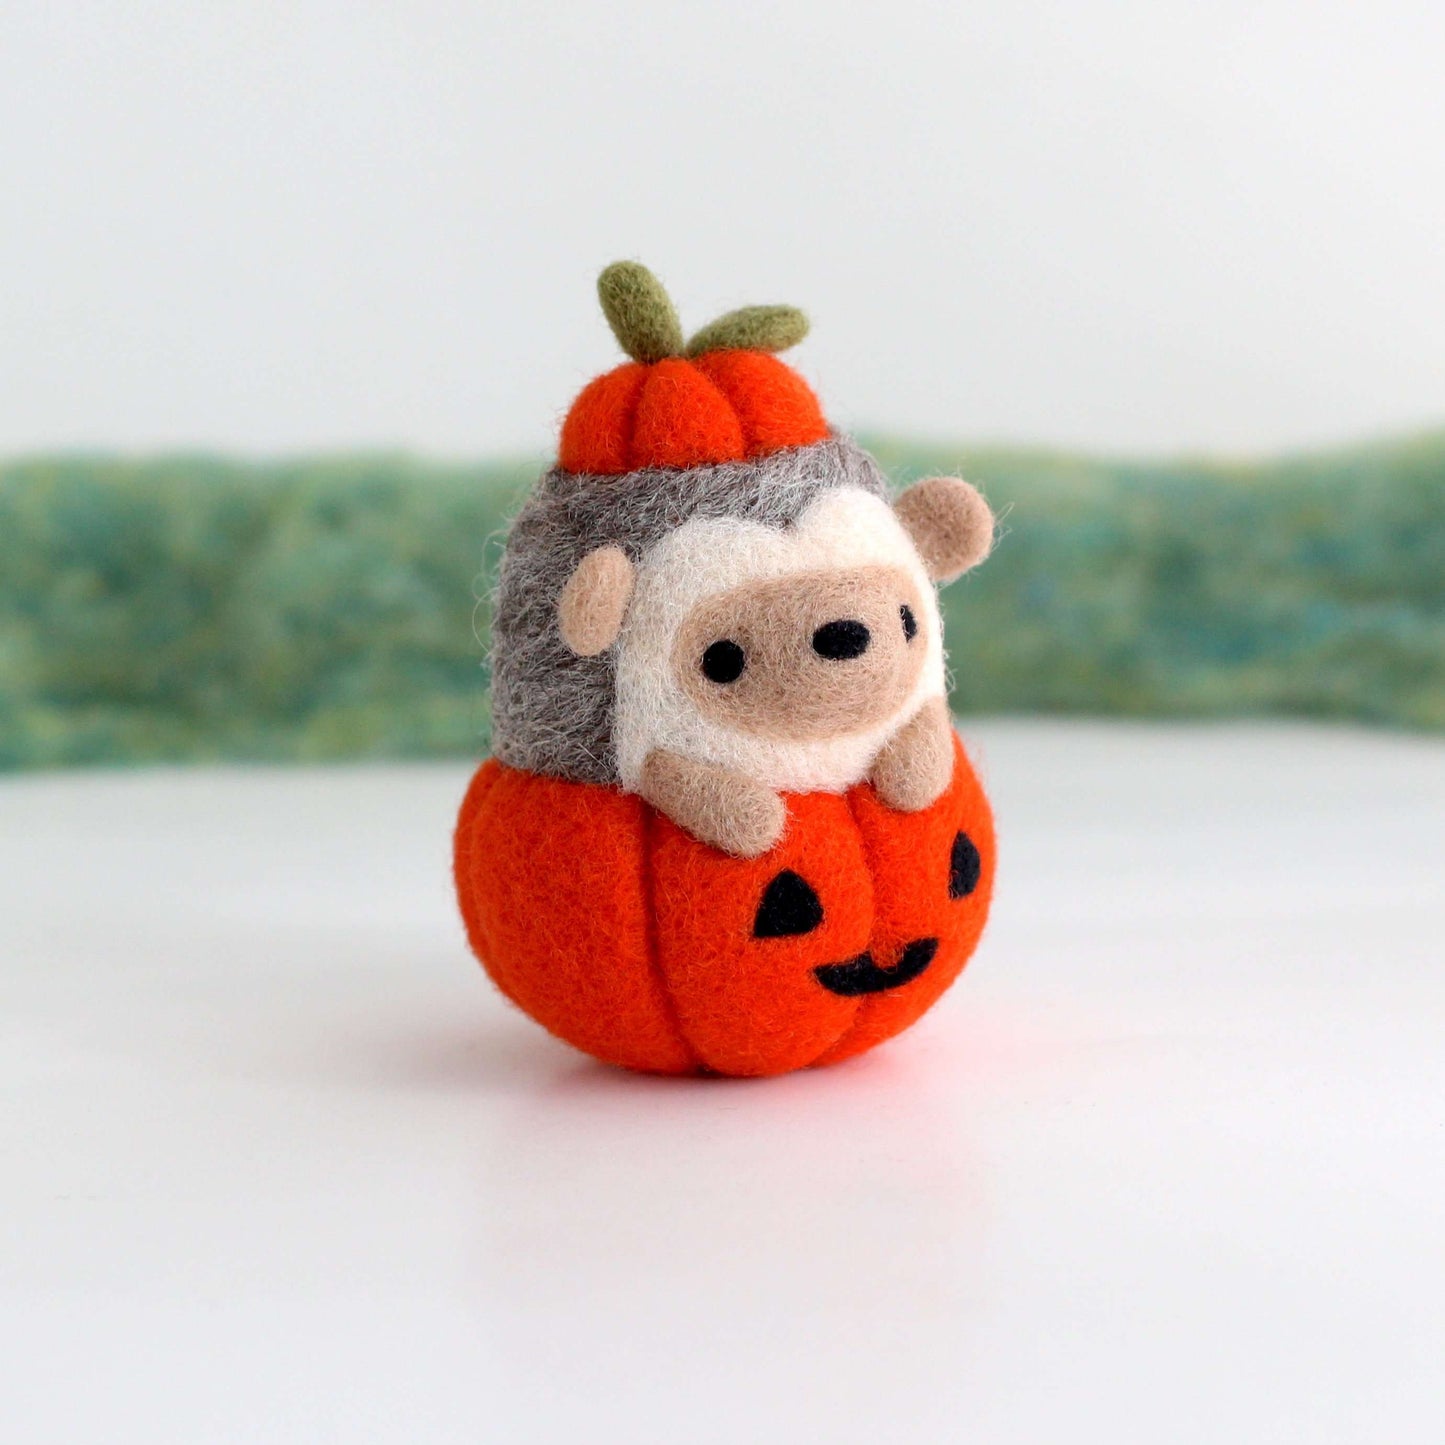 Needle Felted Hedgehog in Jack-o'-Lantern (Bright Orange Variant) by Wild Whimsy Woolies